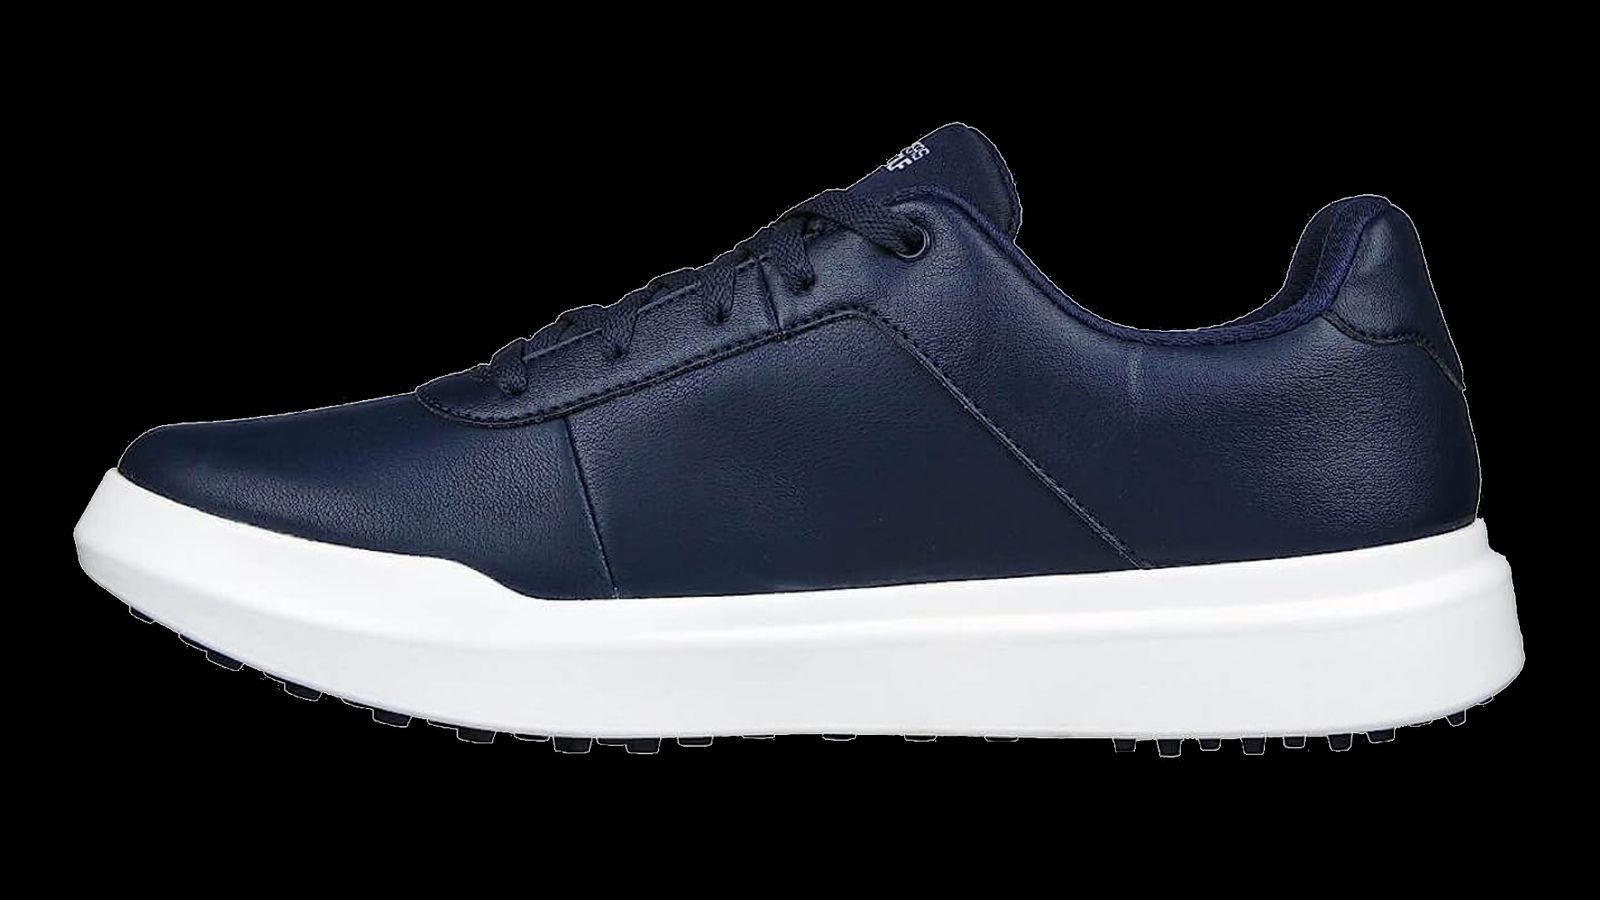 Skechers GO GOLF Drive 5 product image of a navy leather and synthetic golf shoe with a white midsole unit.